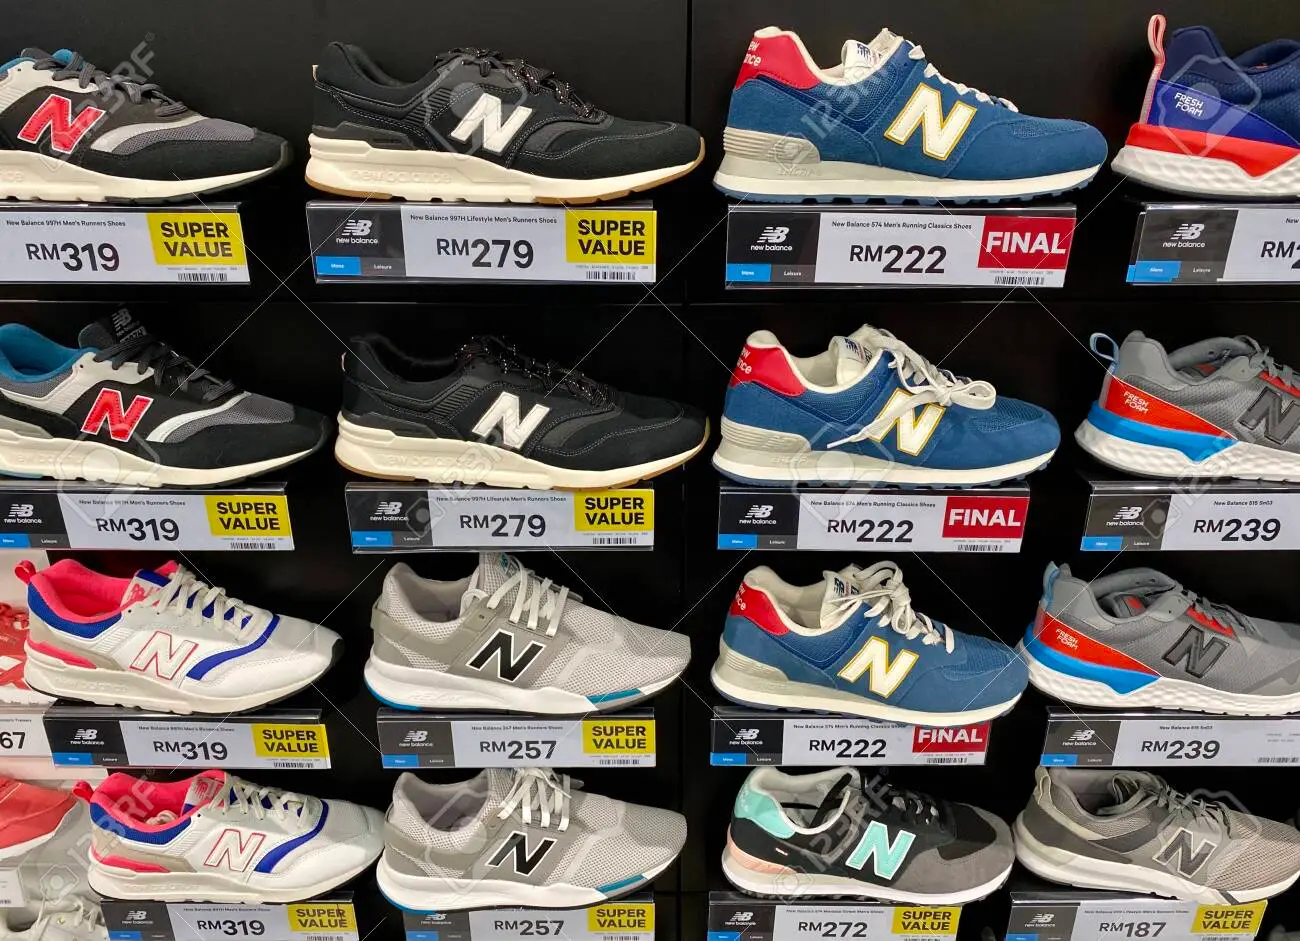 147835650 kuala lumpur malaysia may 18 2020 row of new balance sport shoes on display in local sports outlet